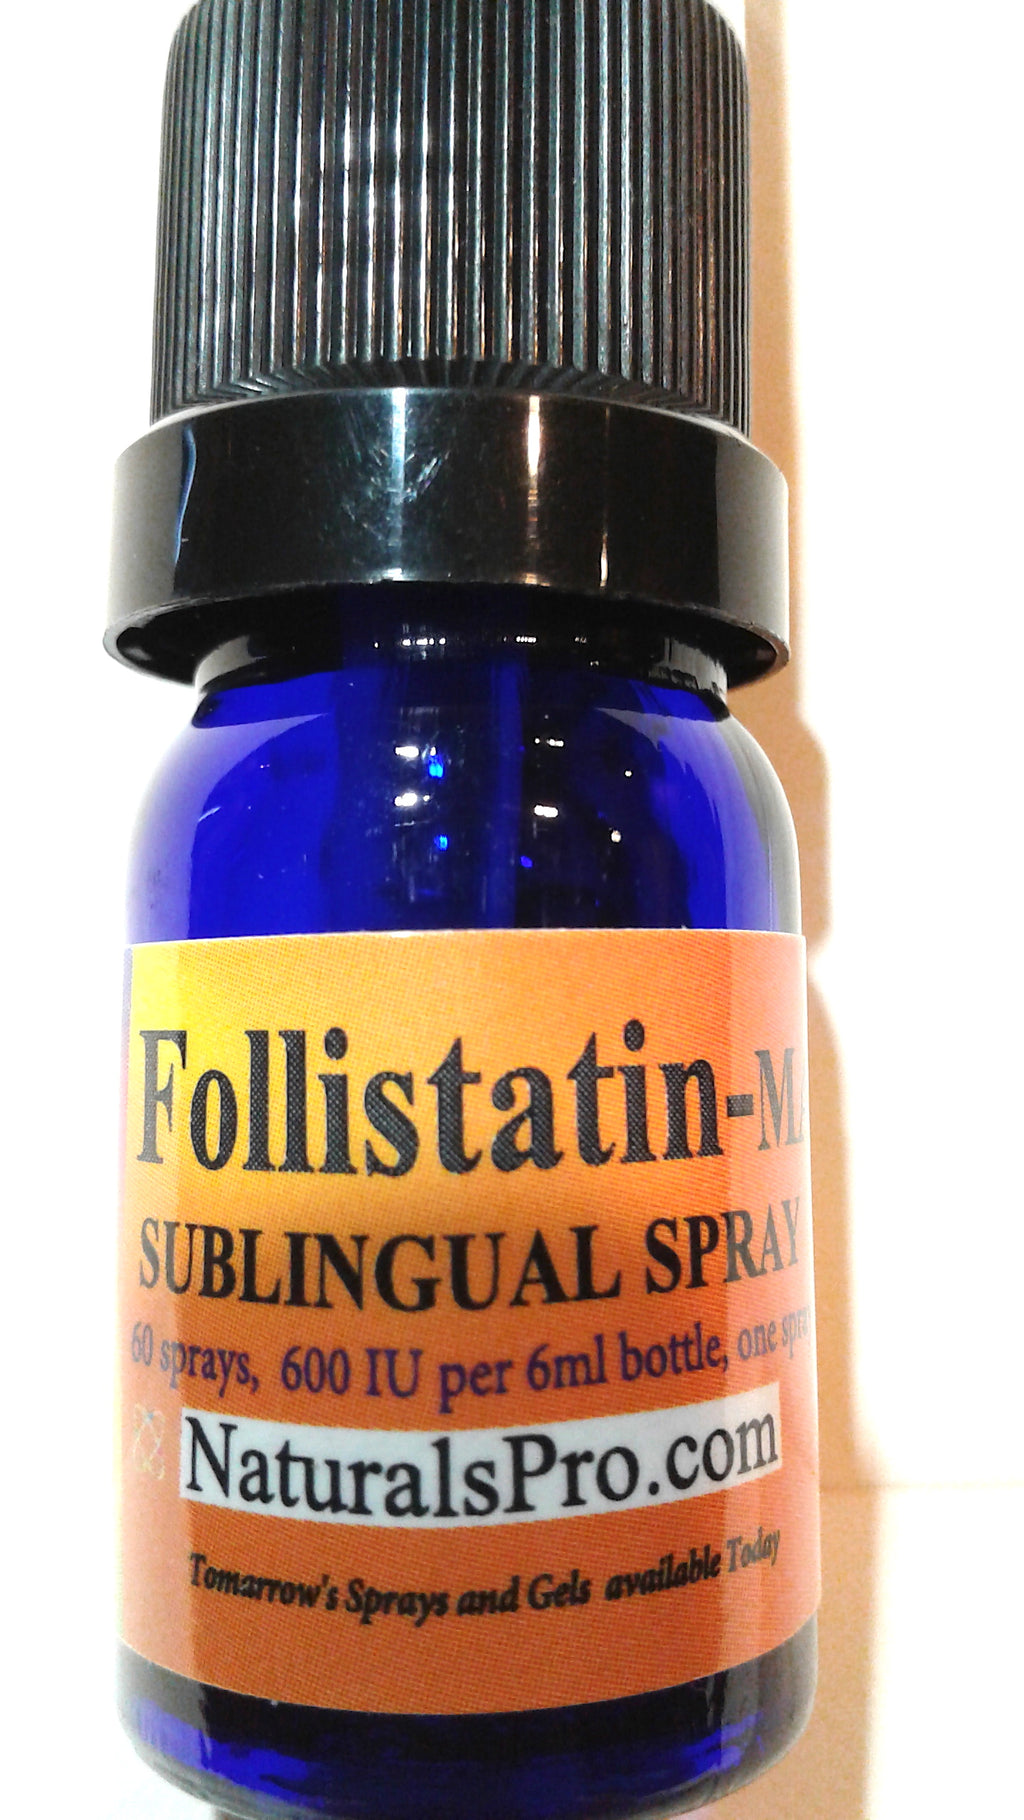 Follistatin-Max helps to increase muscle mass and reverse sarcopenia lost as a result of aging and a low protein diet.